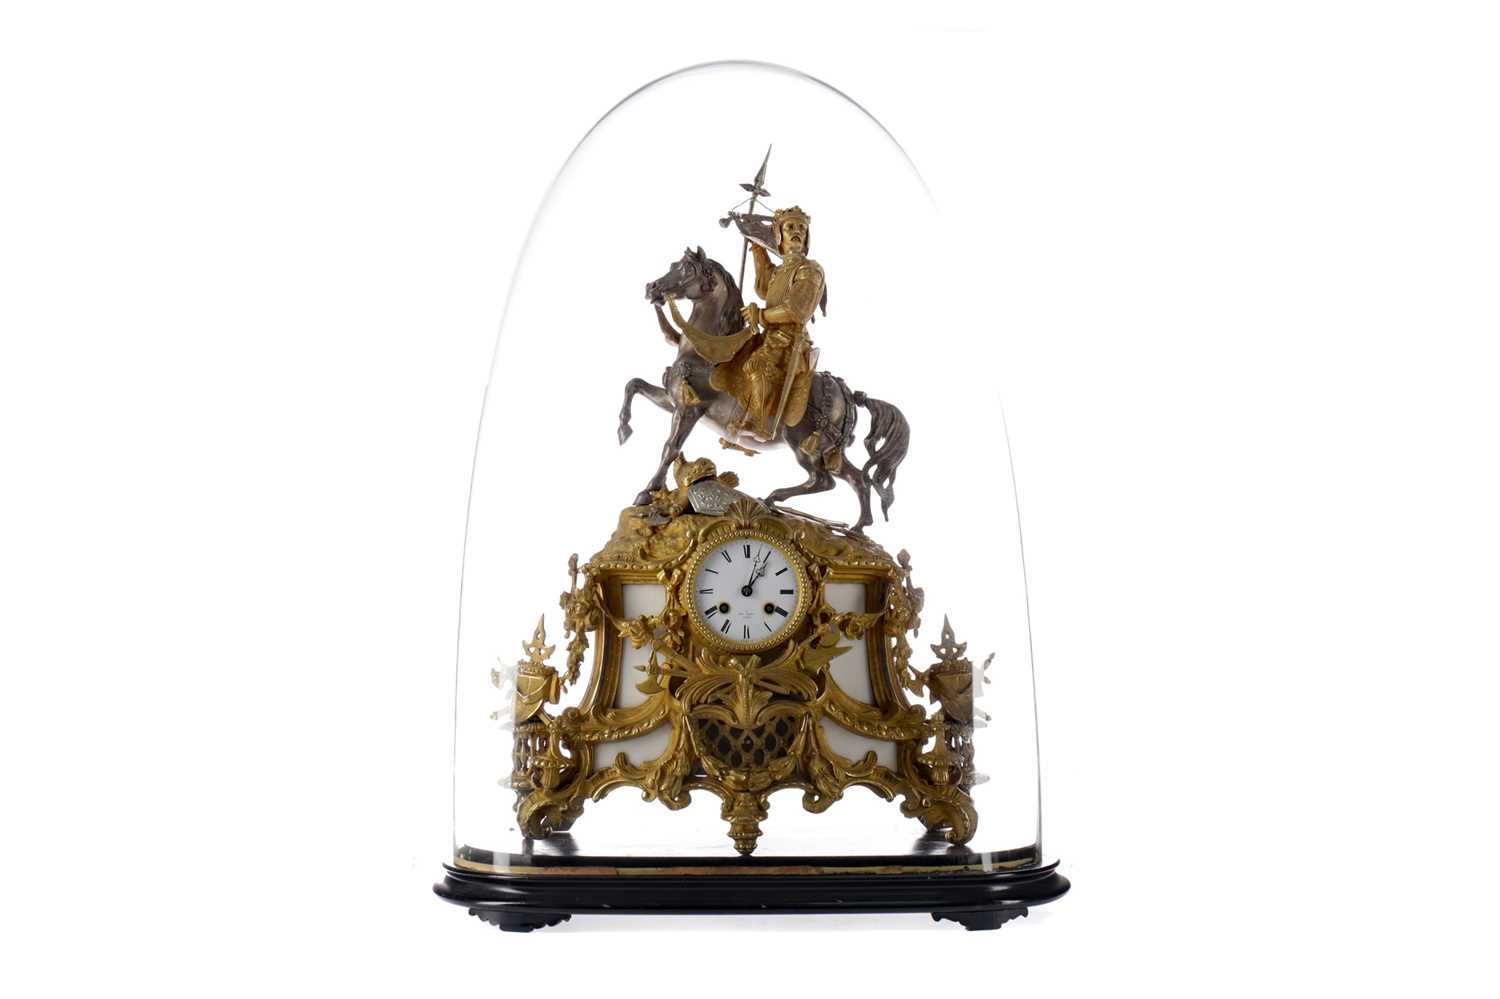 Lot 1701 - AN IMPRESSIVE LATE 19TH CENTURY FRENCH FIGURAL MANTEL CLOCK